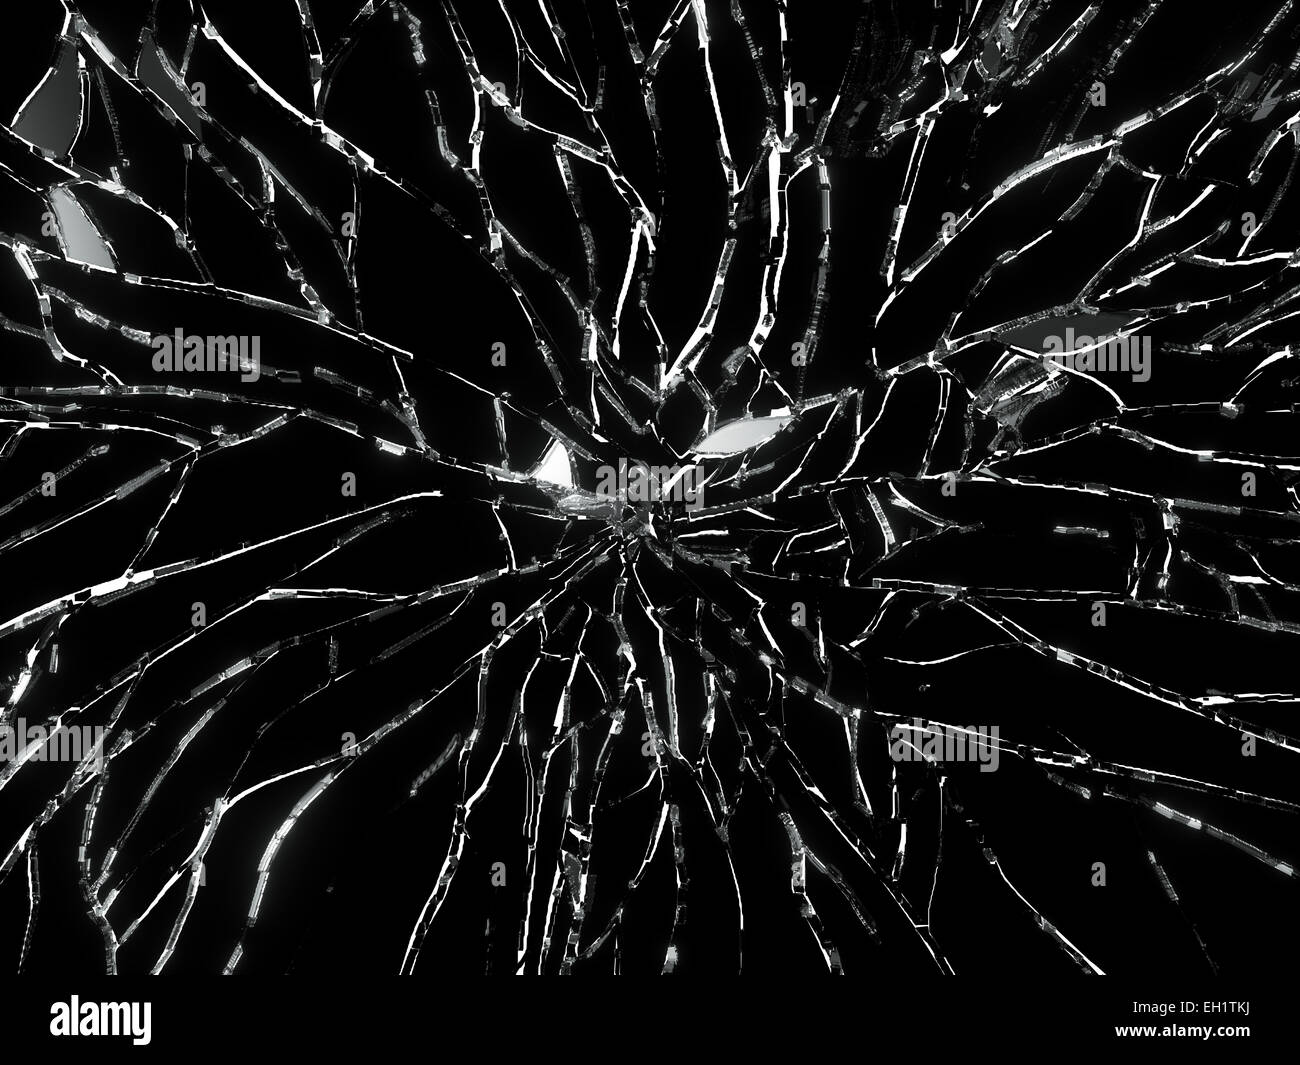 Deflated and shattered glass over black. Useful as background